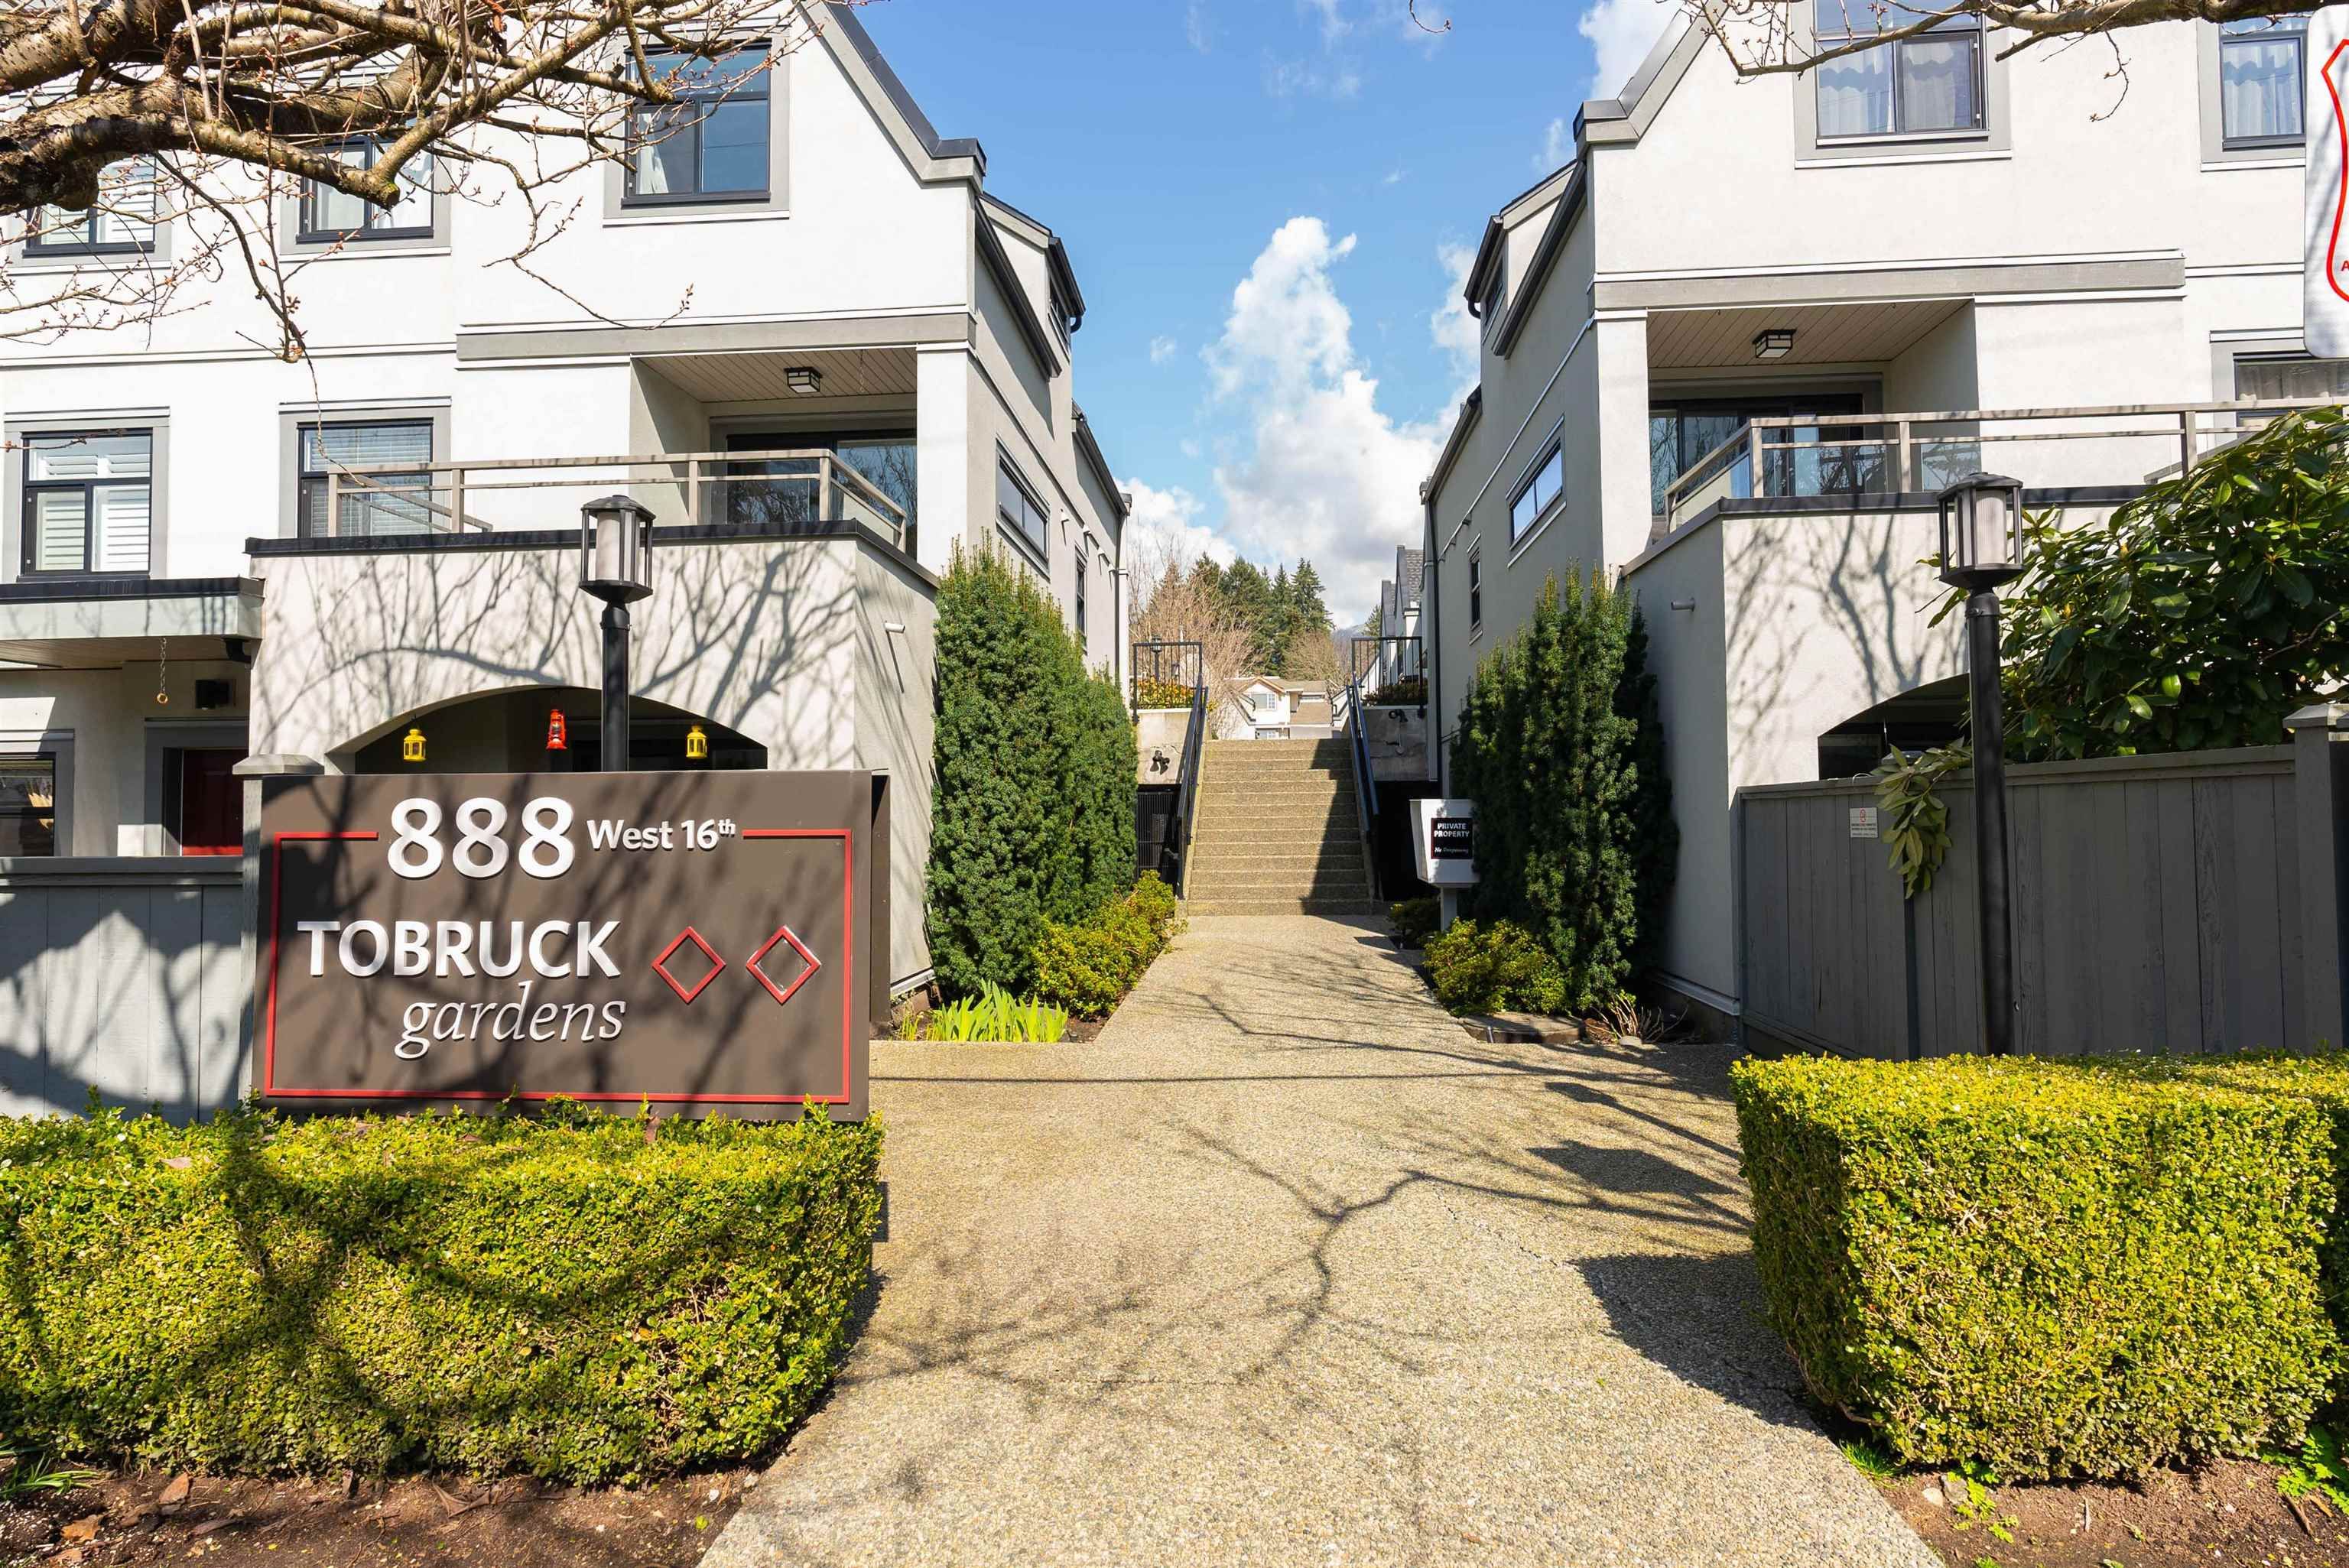 Main Photo: 12 888 W 16TH STREET in : Mosquito Creek Townhouse for sale (North Vancouver)  : MLS®# R2631435